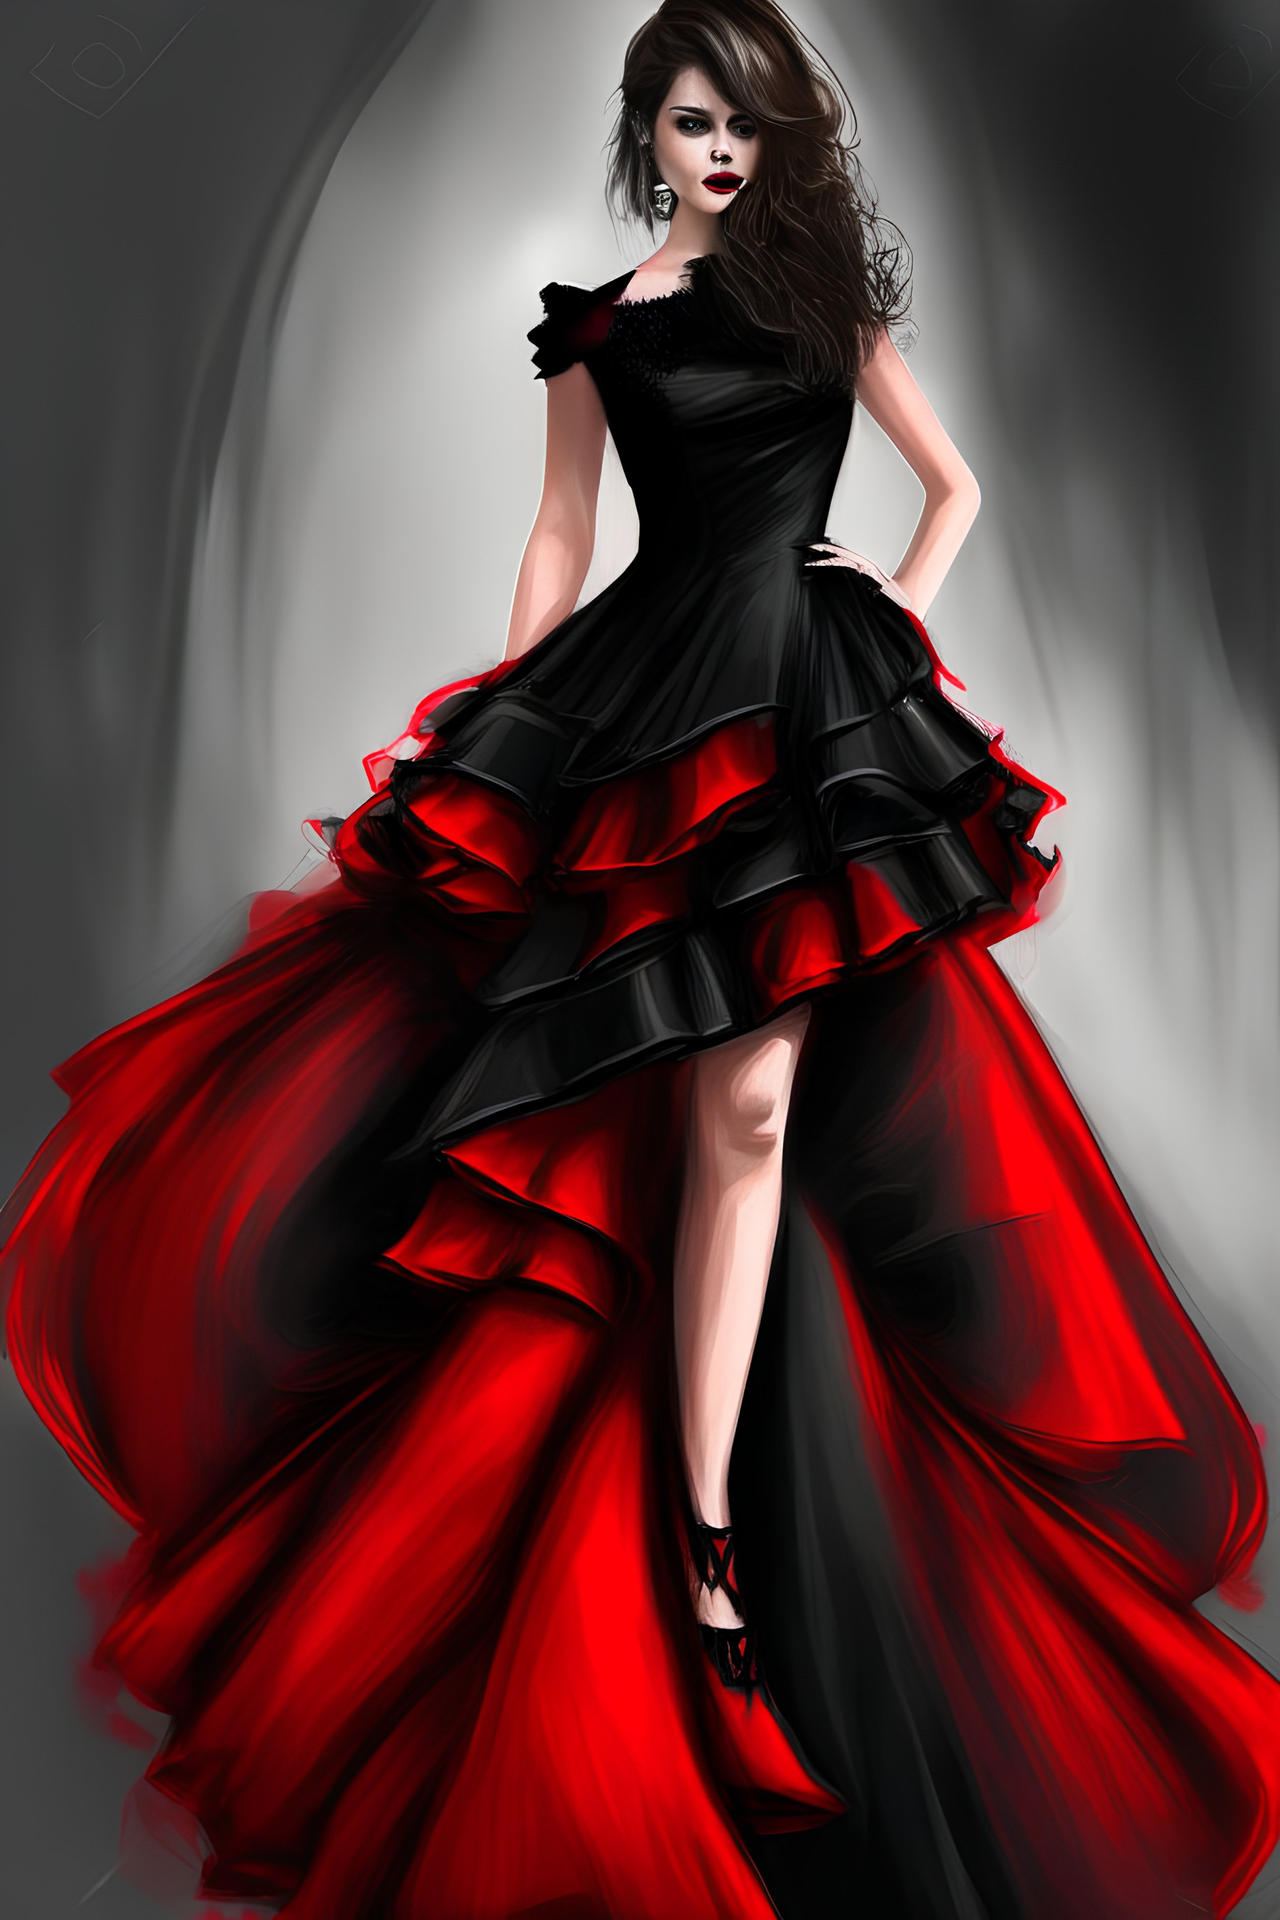 Fashion Model in a red and black dress by Val-Navi on DeviantArt